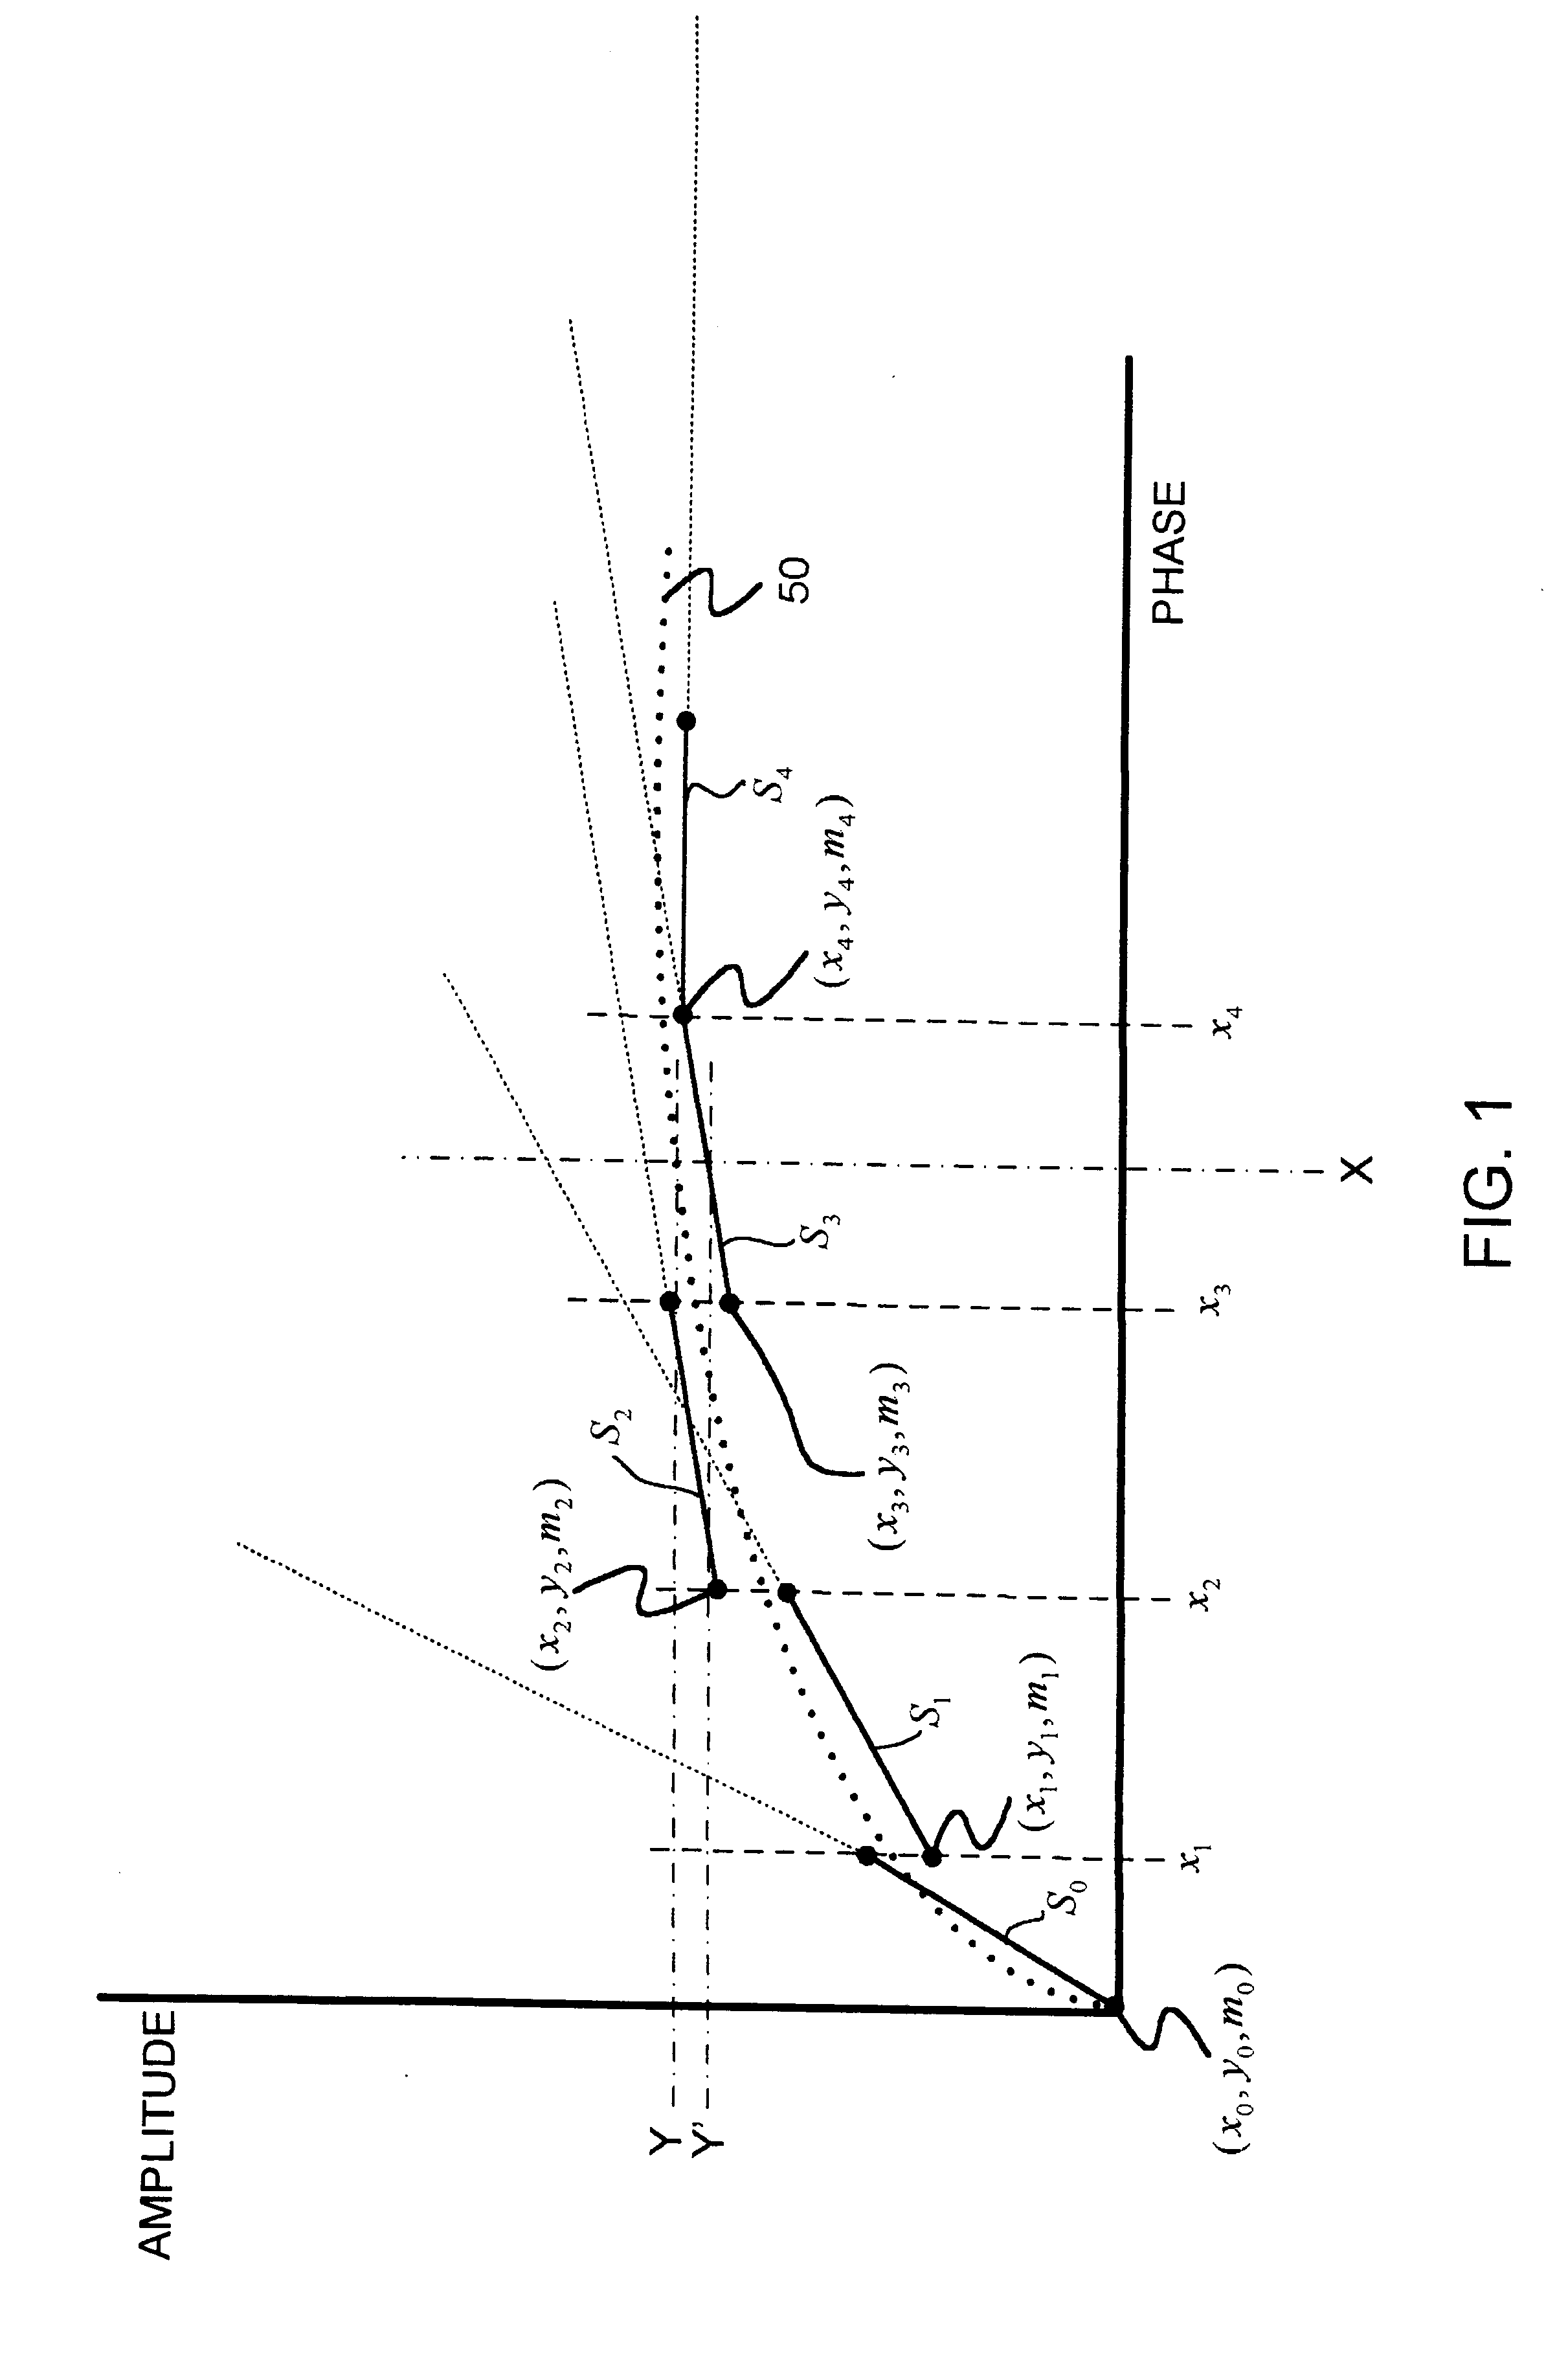 Phase to sine amplitude conversion system and method